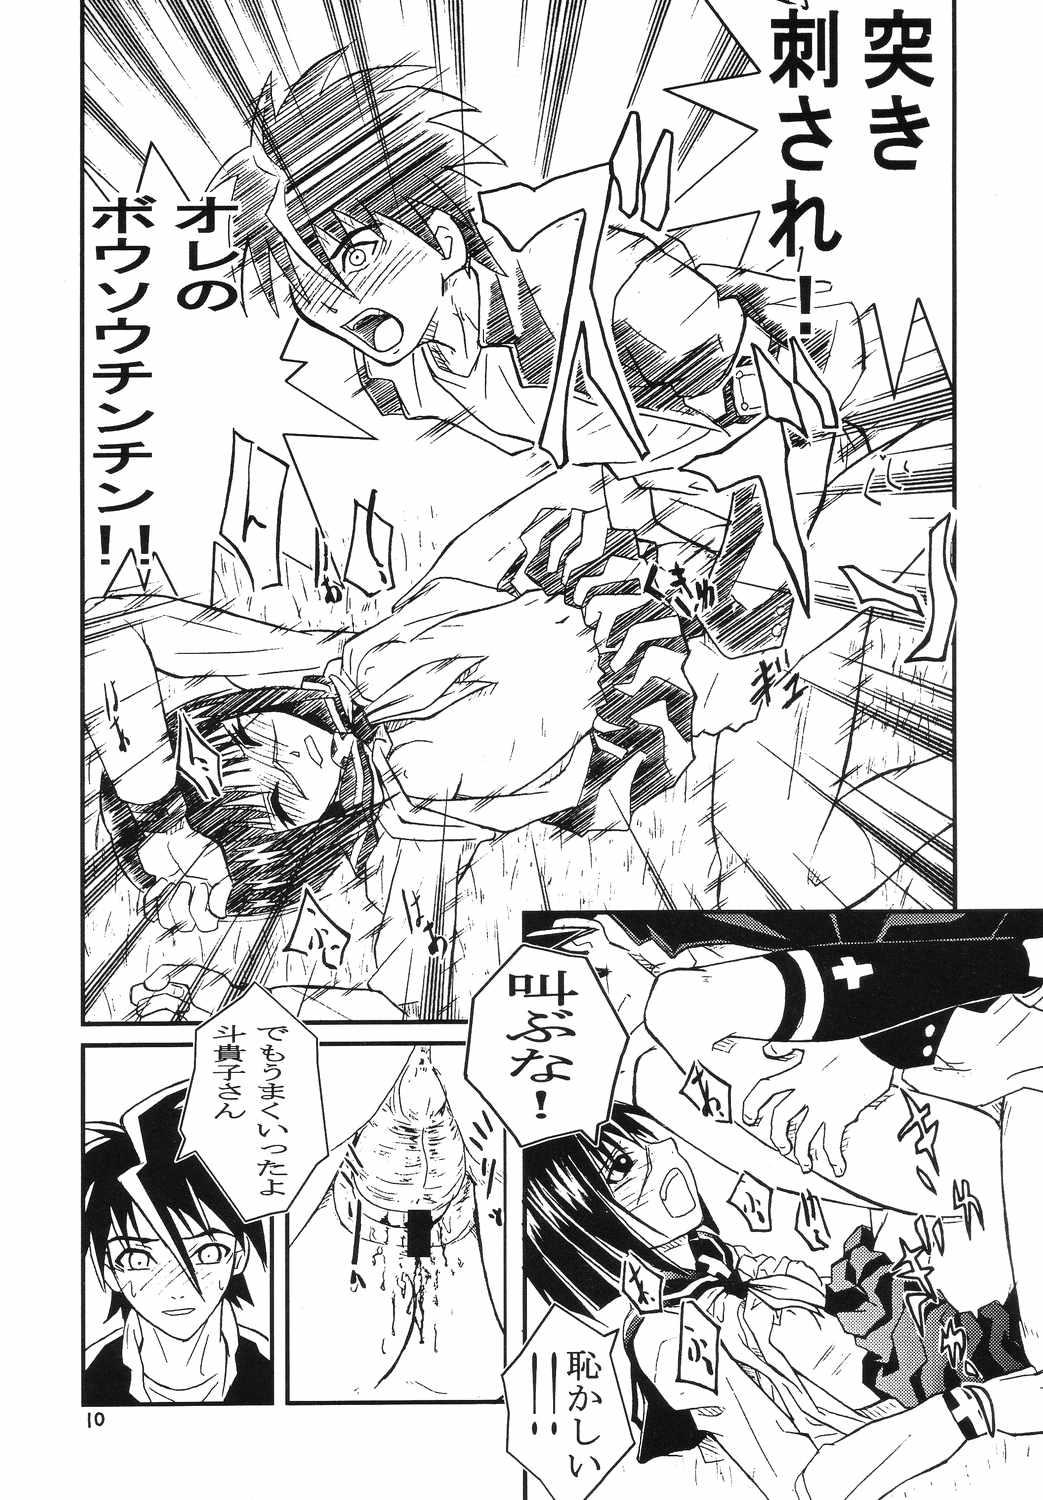 Tats Foxeye Valkyrie - Busou renkin Eating Pussy - Page 9